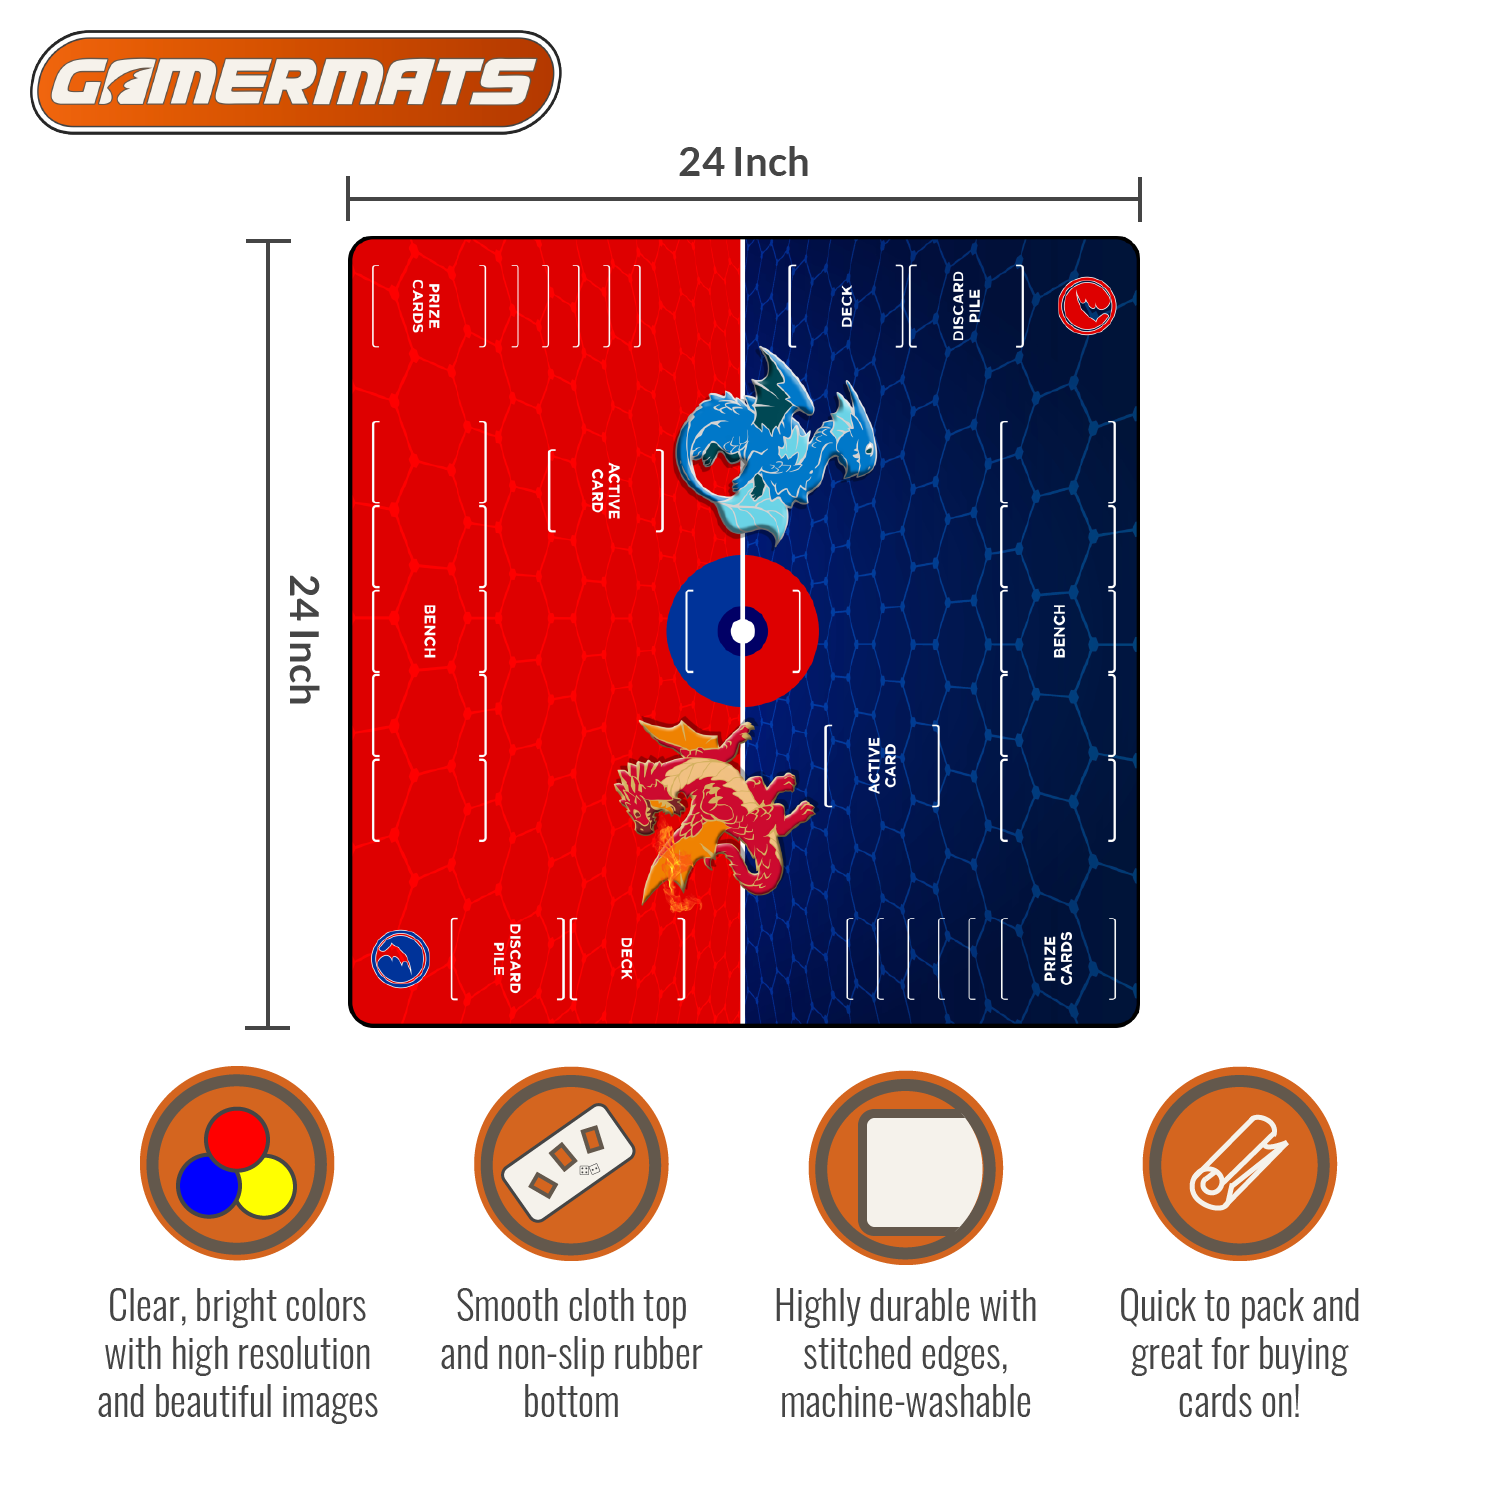 Red v Blue - Two-Player XL Playmat Pokemon Compatible